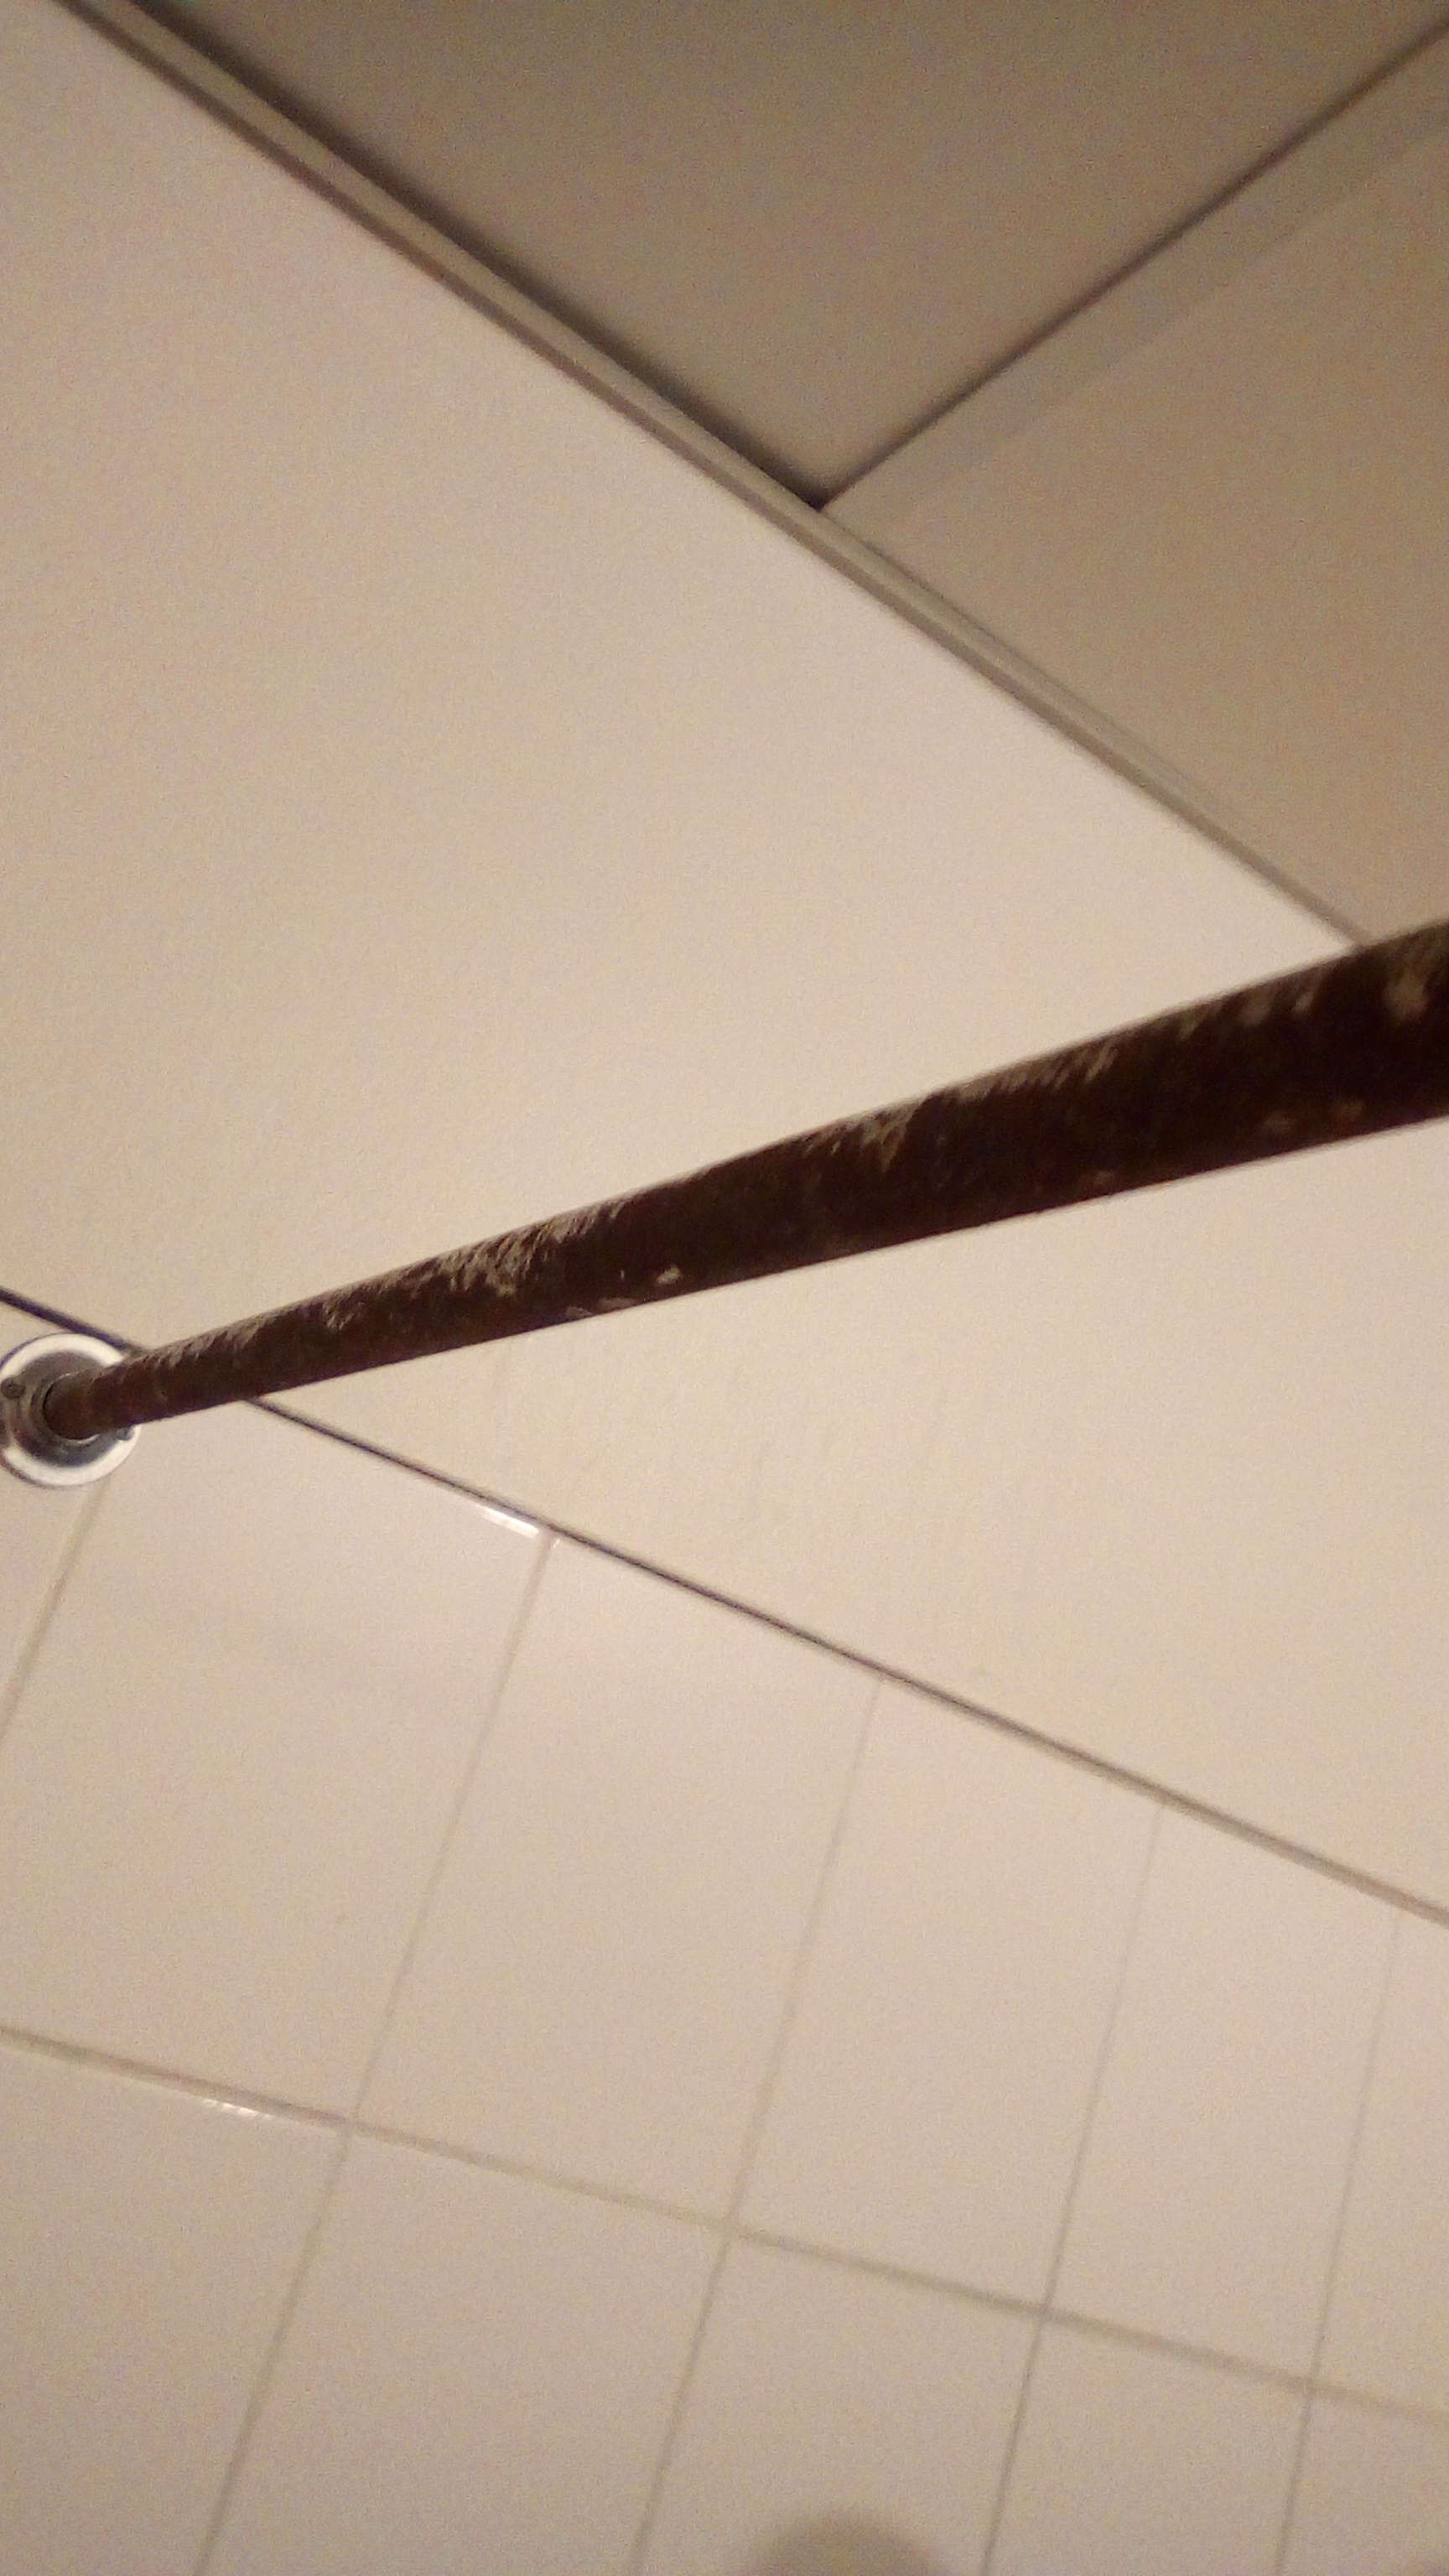 Rusty Metal Shower Frame And Rod